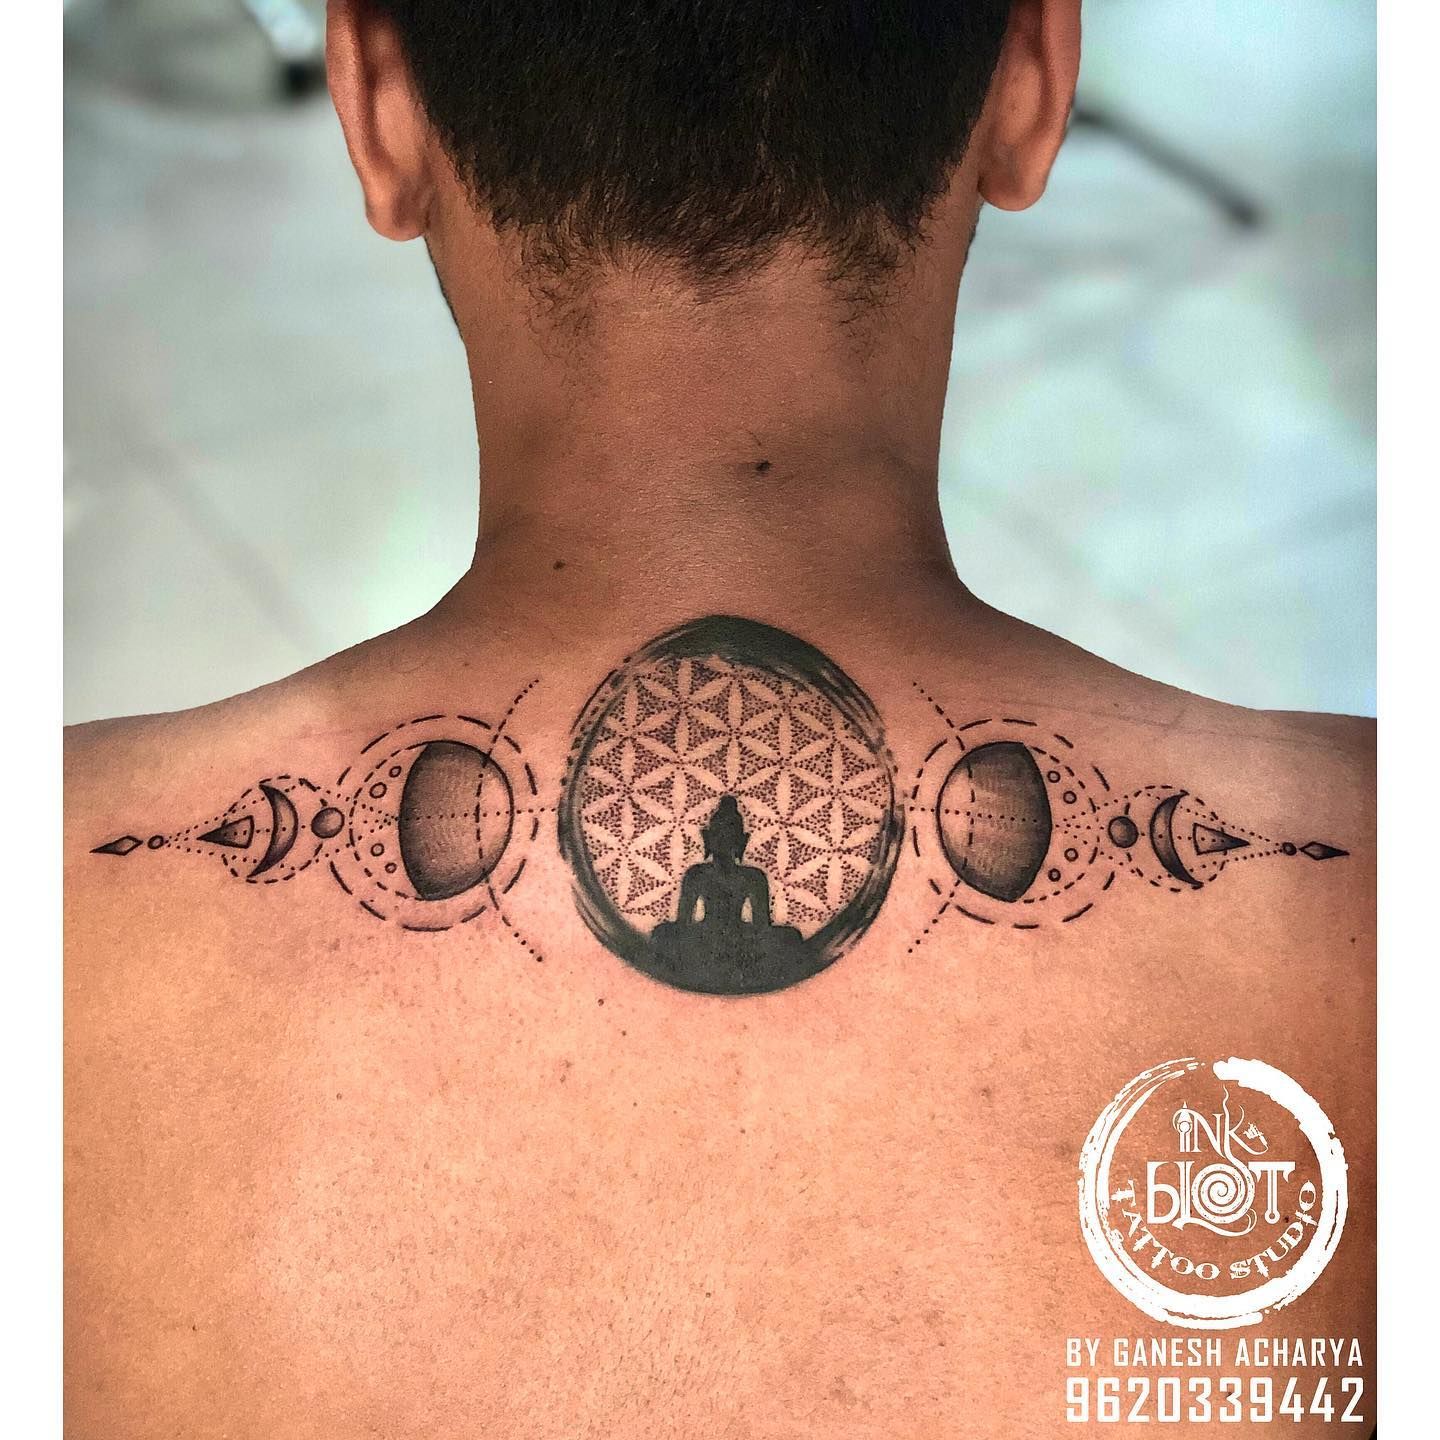 240+ Spiritual Tattoo Designs With Meanings (2020) Metaphysical Ideas | Buddha  tattoos, Buddha tattoo design, Tattoos for guys